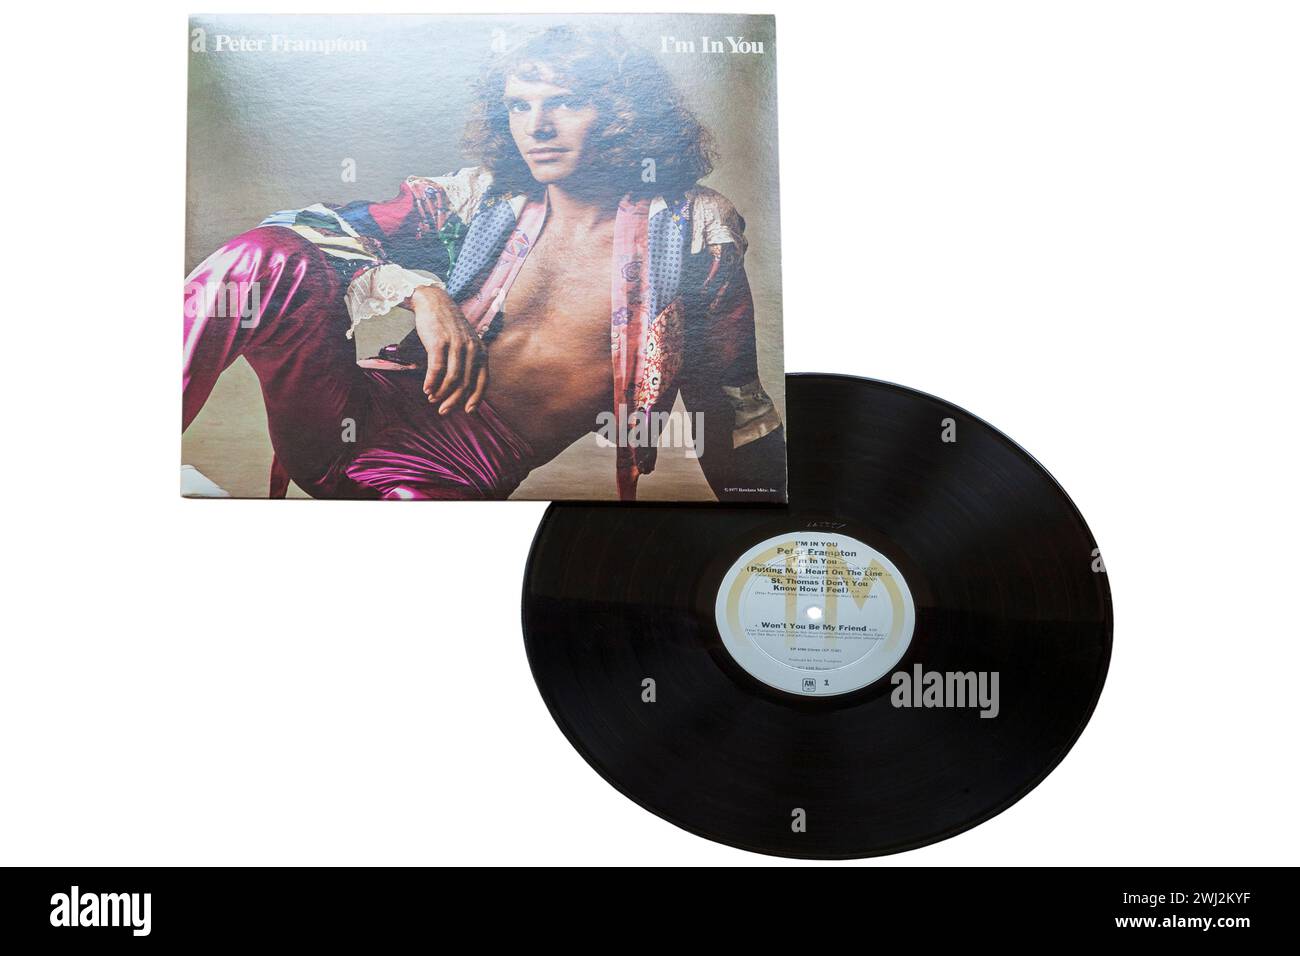 Peter Frampton I'm In You vinyl record album LP cover isolated on white background - 1977 Stock Photo